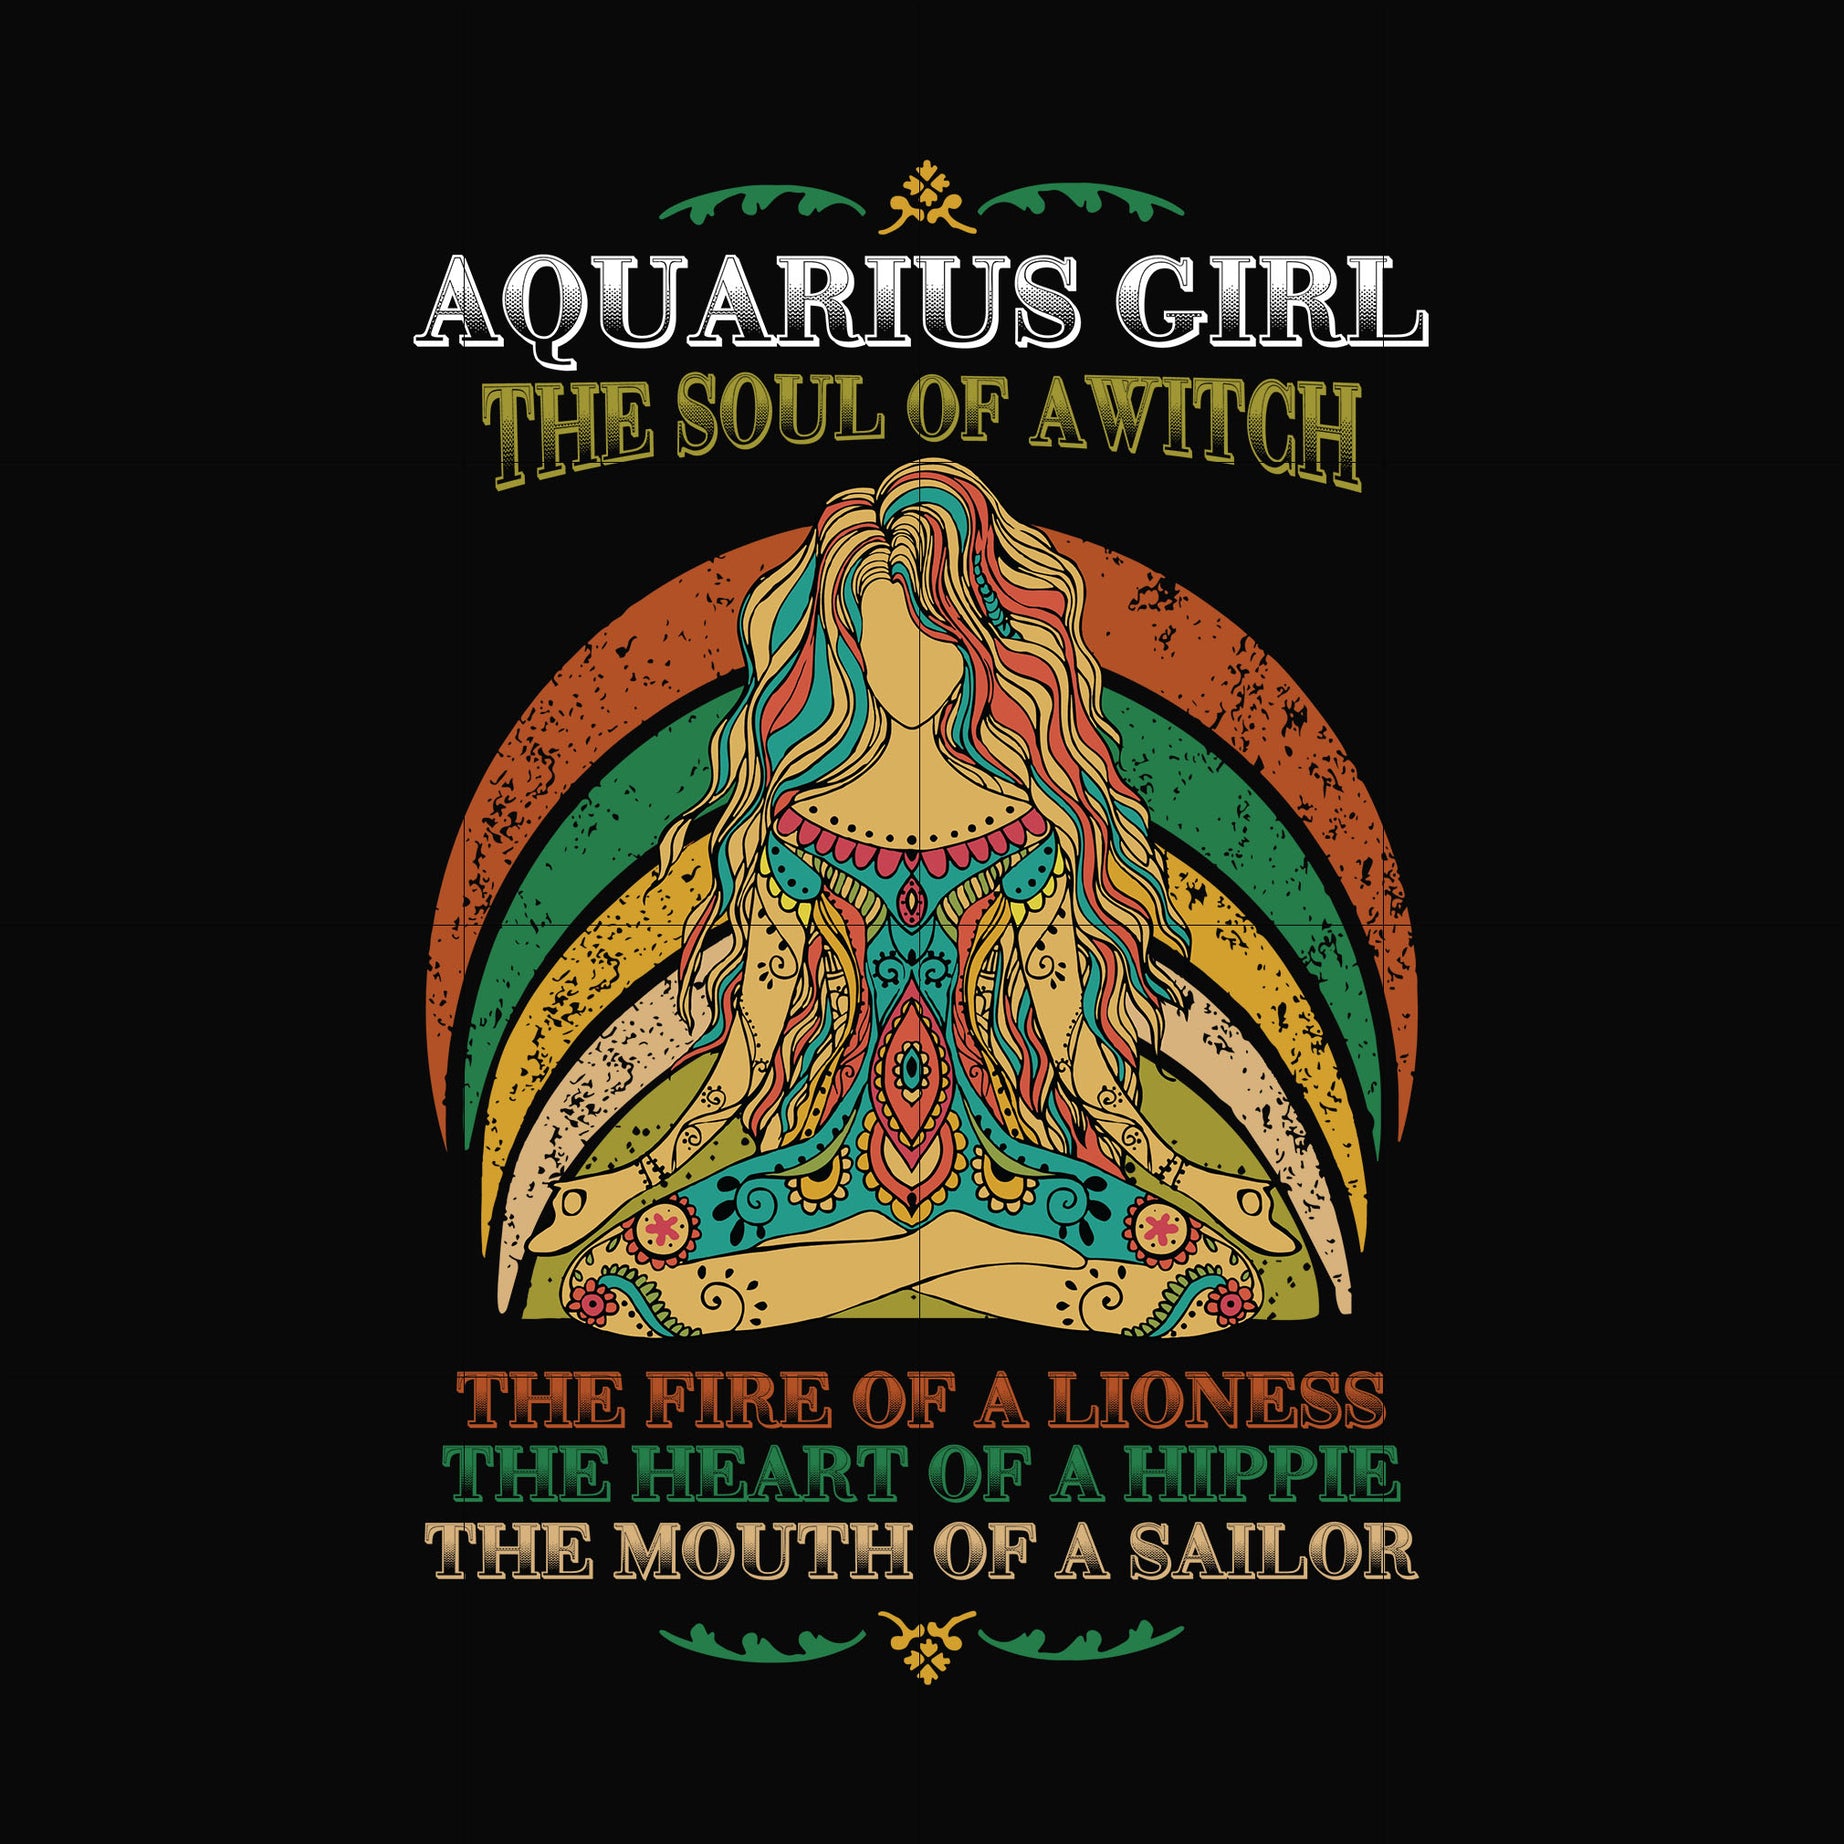 Aquarius girl the soul of a witch svg, the fire of a lioness, the heart of a hippie, the mouth of a sailor svg, png, dxf, eps digital file NBD0031